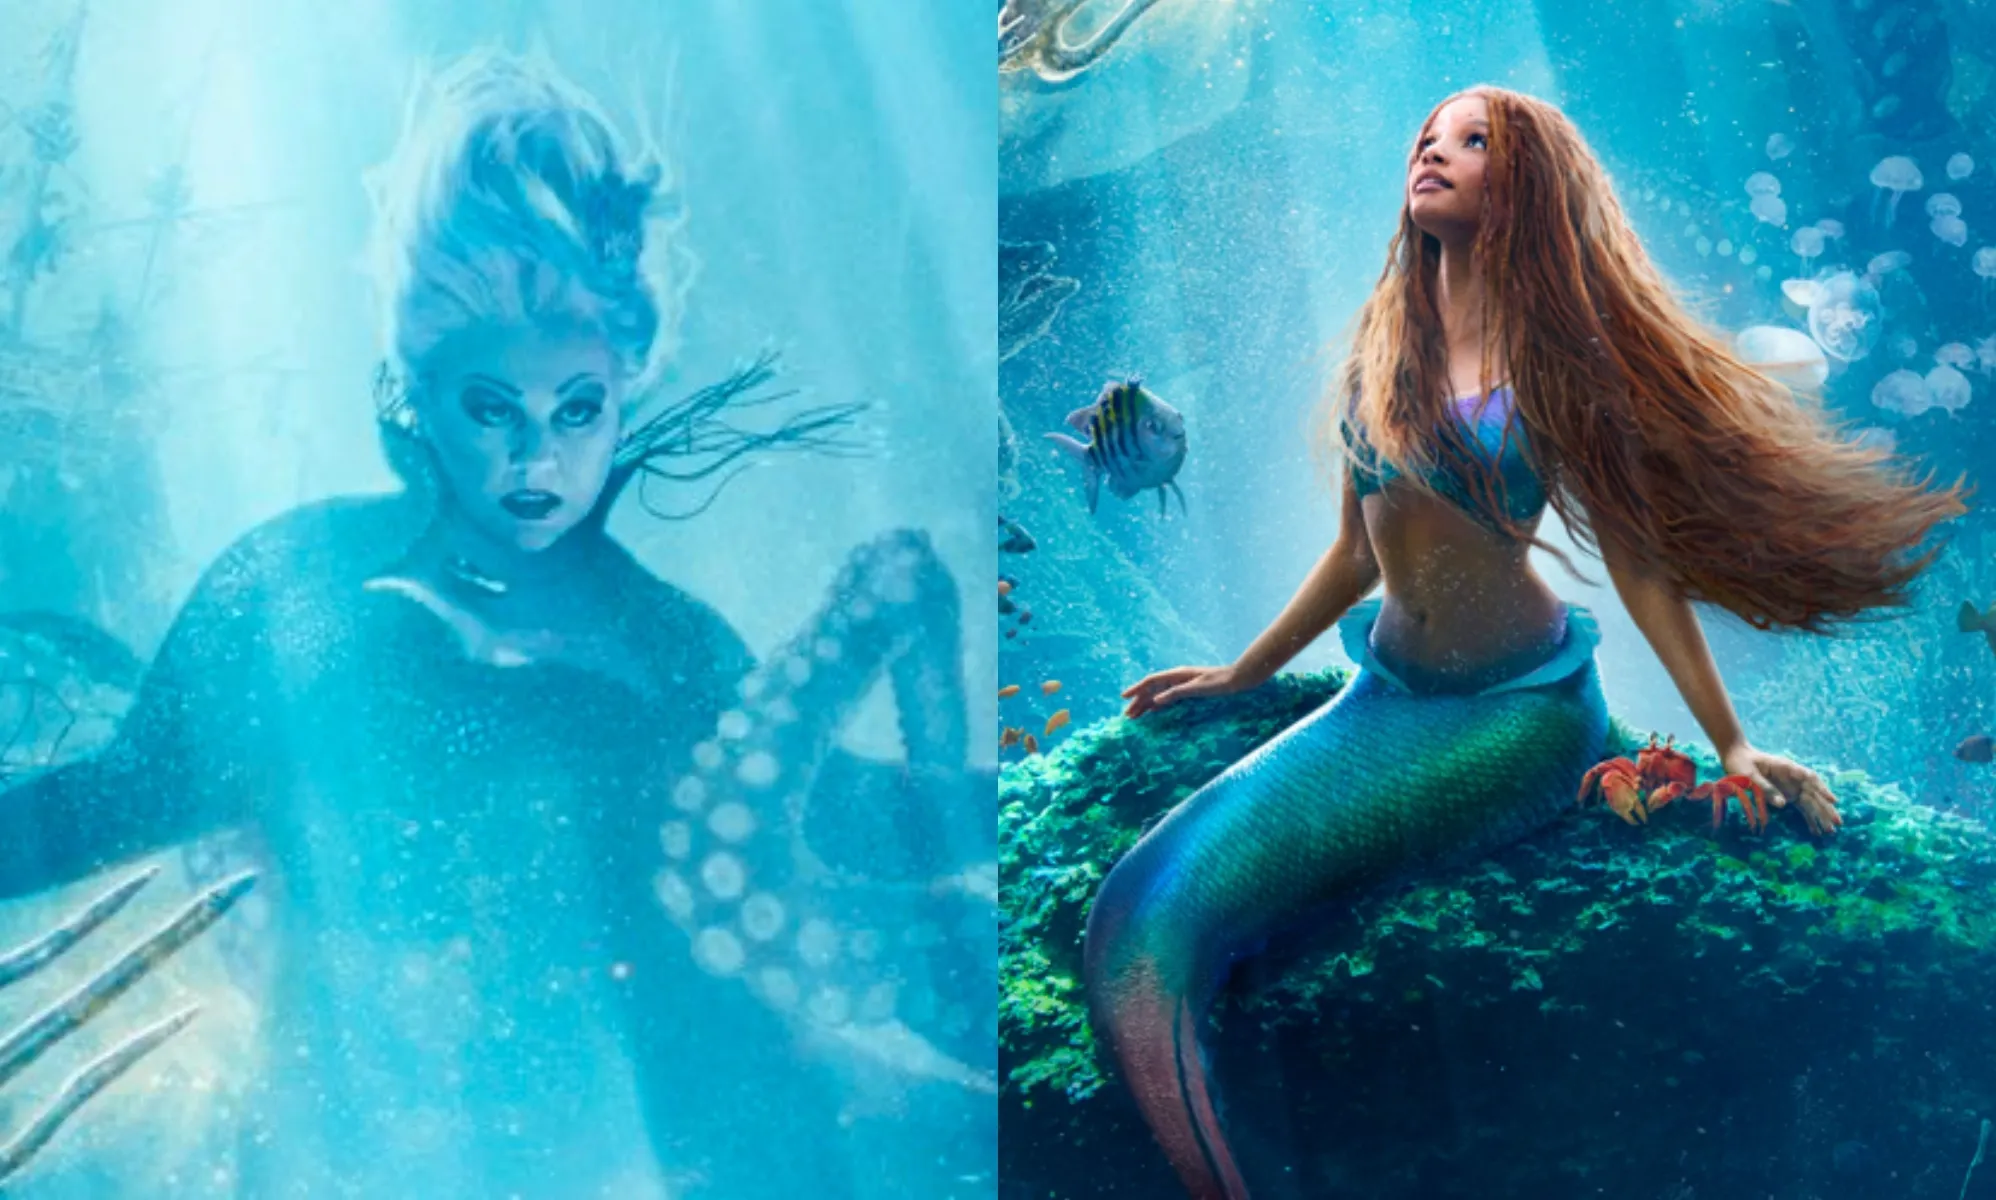 The Little Mermaid trailer gives first look at McCarthy as Ursula